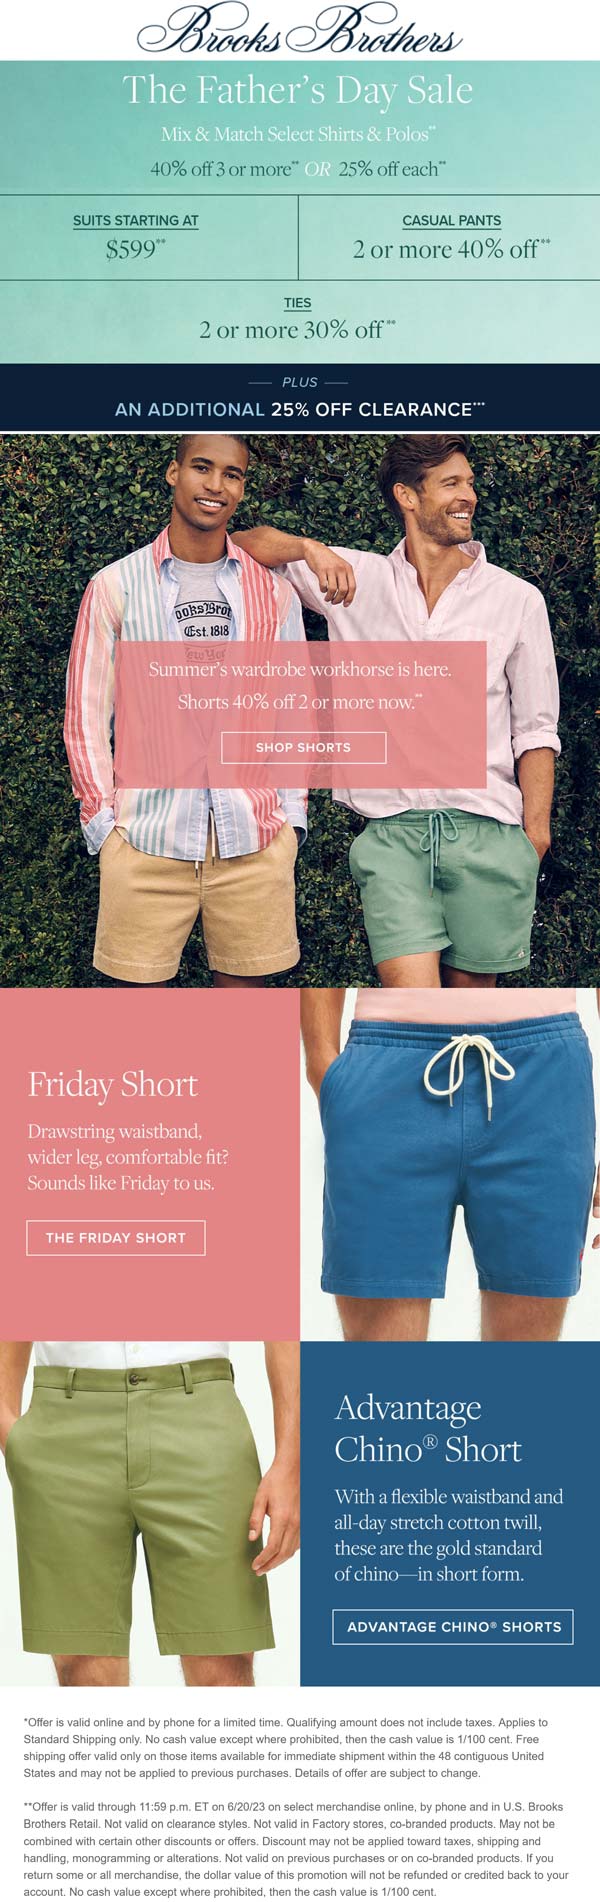 Brooks Brothers stores Coupon  25-40% off mix & match at Brooks Brothers, ditto online #brooksbrothers 